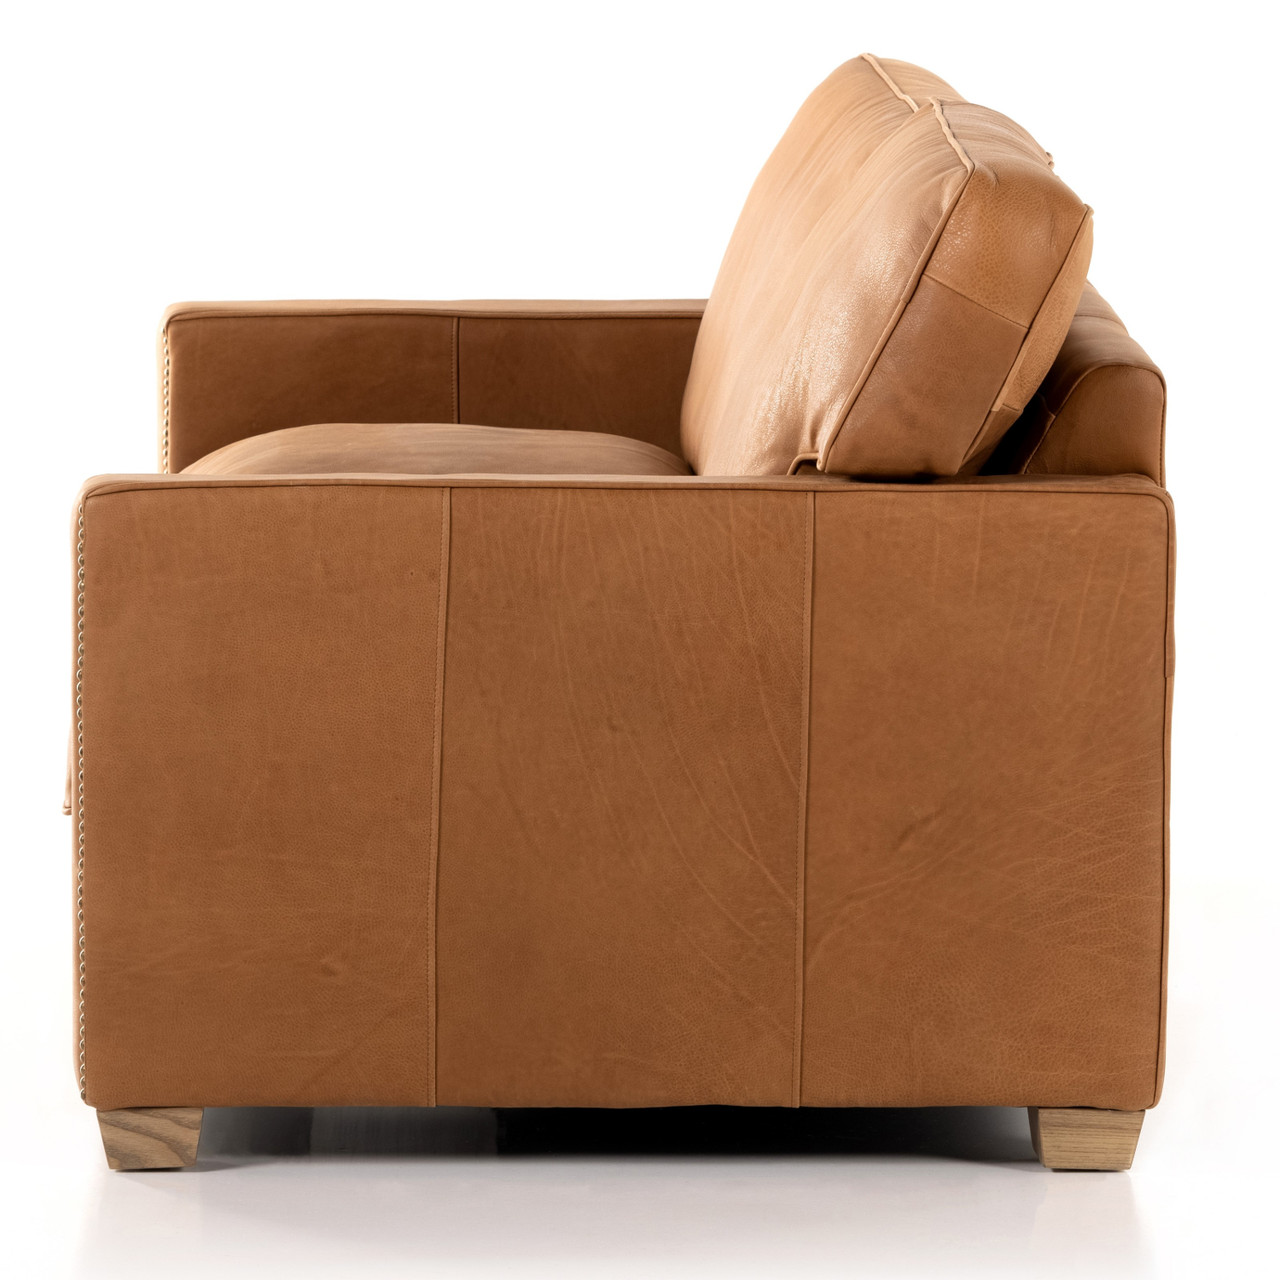 JAYDEN CREATION Nuria 87 in. wide Camel Leather Sofa with